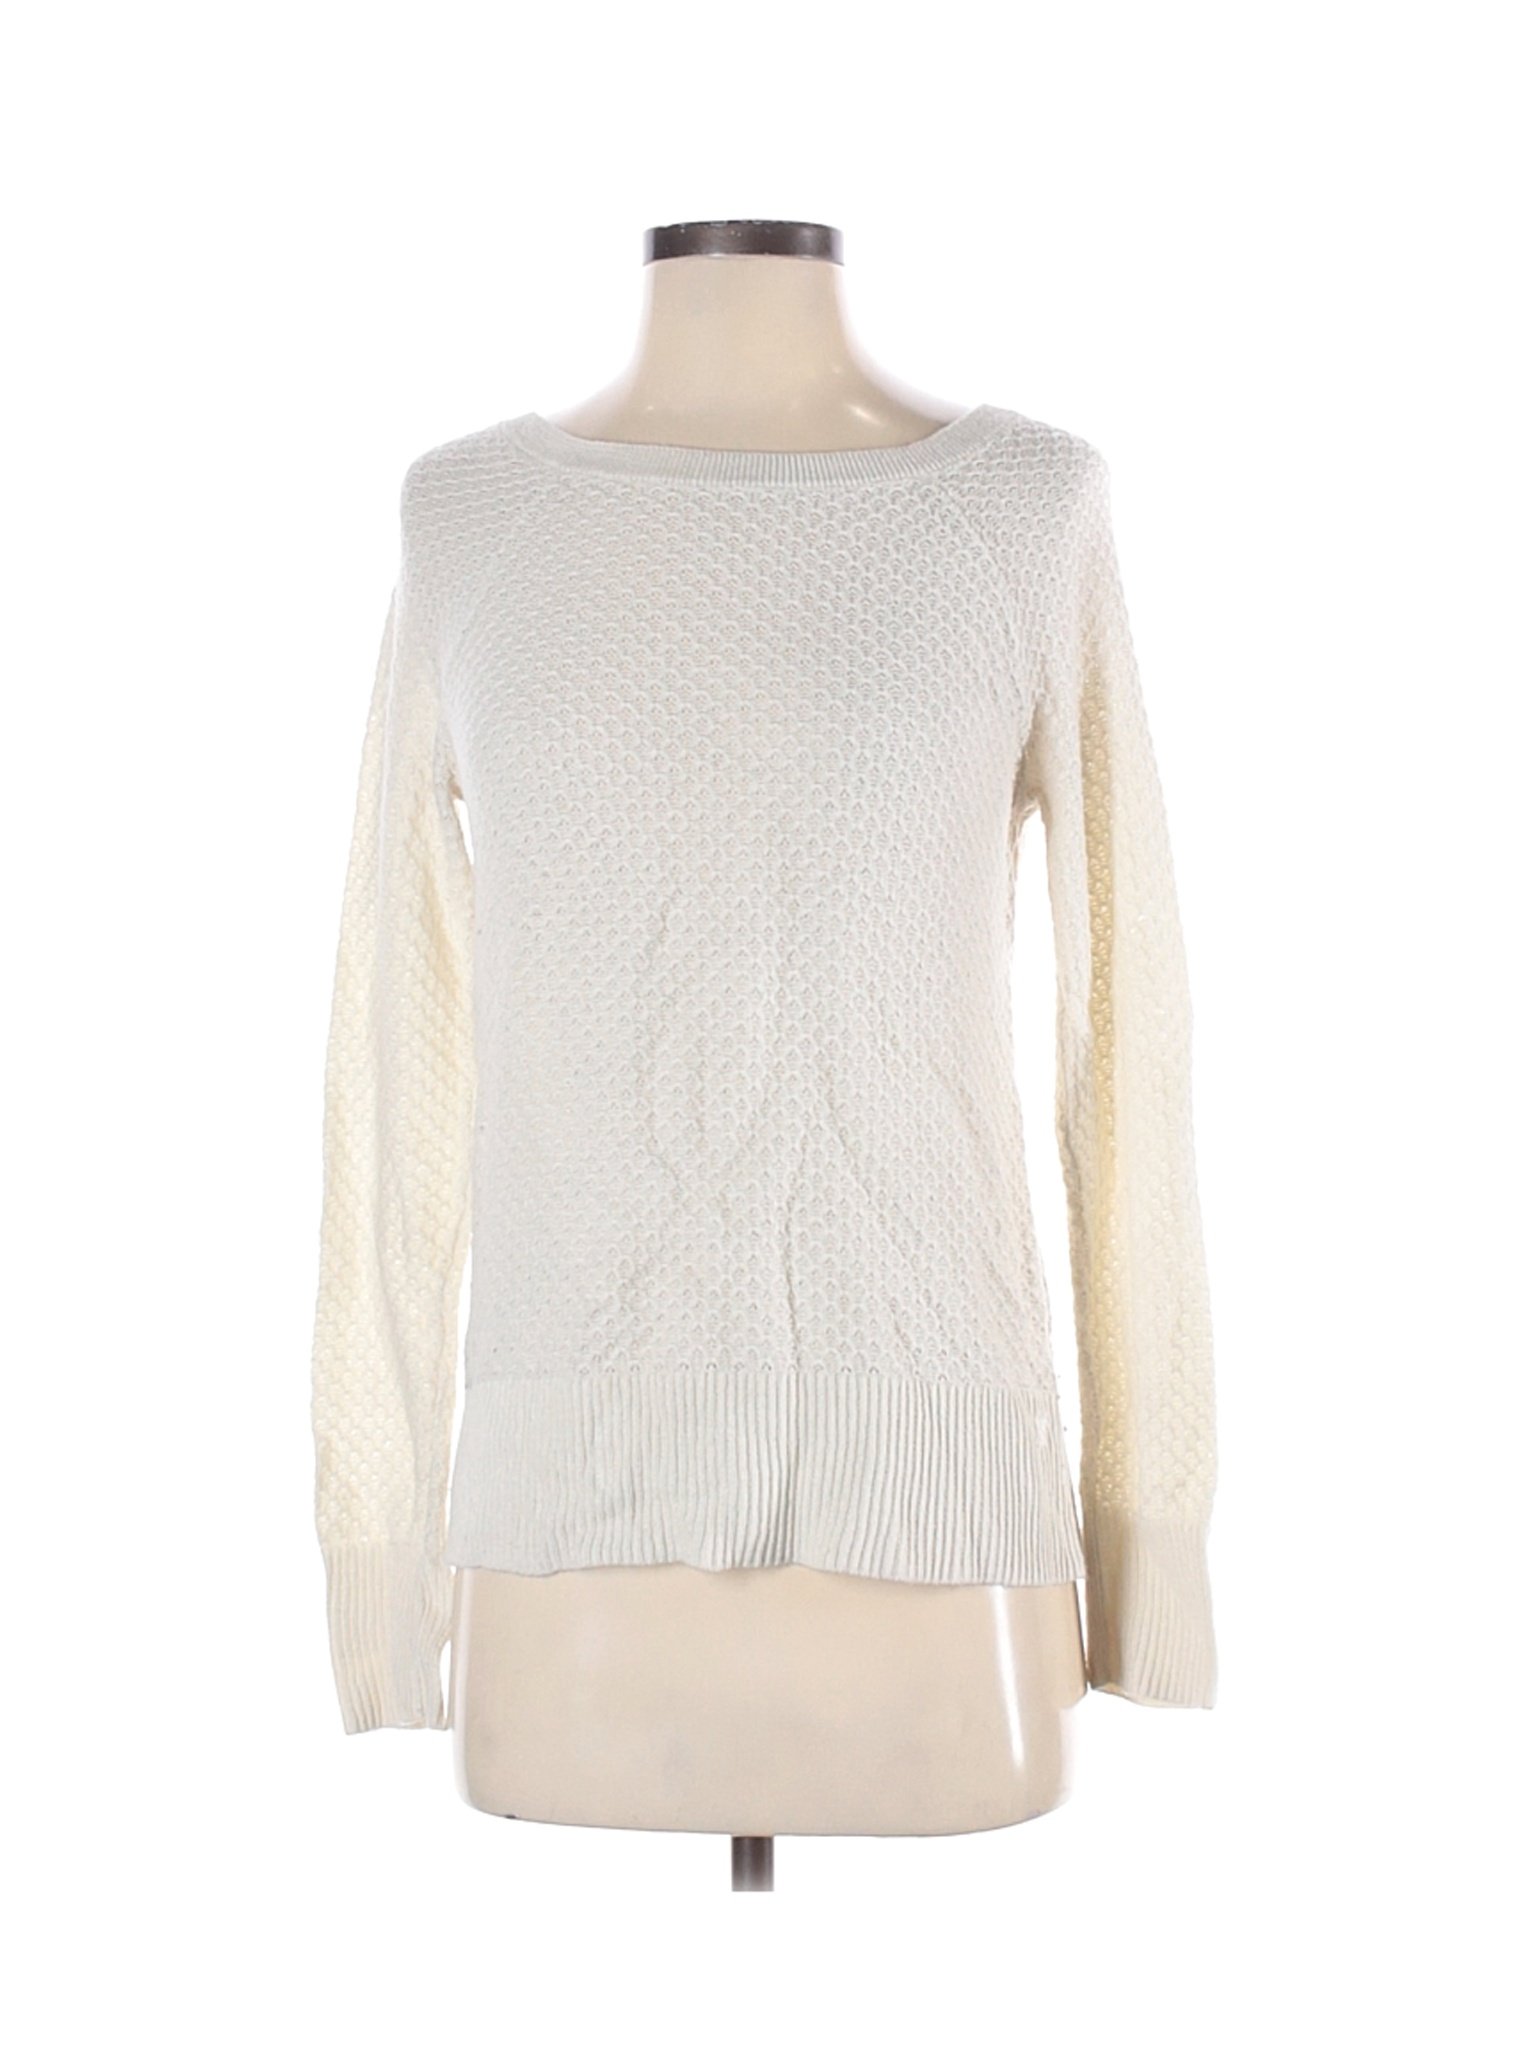 American Eagle Outfitters Women White Pullover Sweater S | eBay